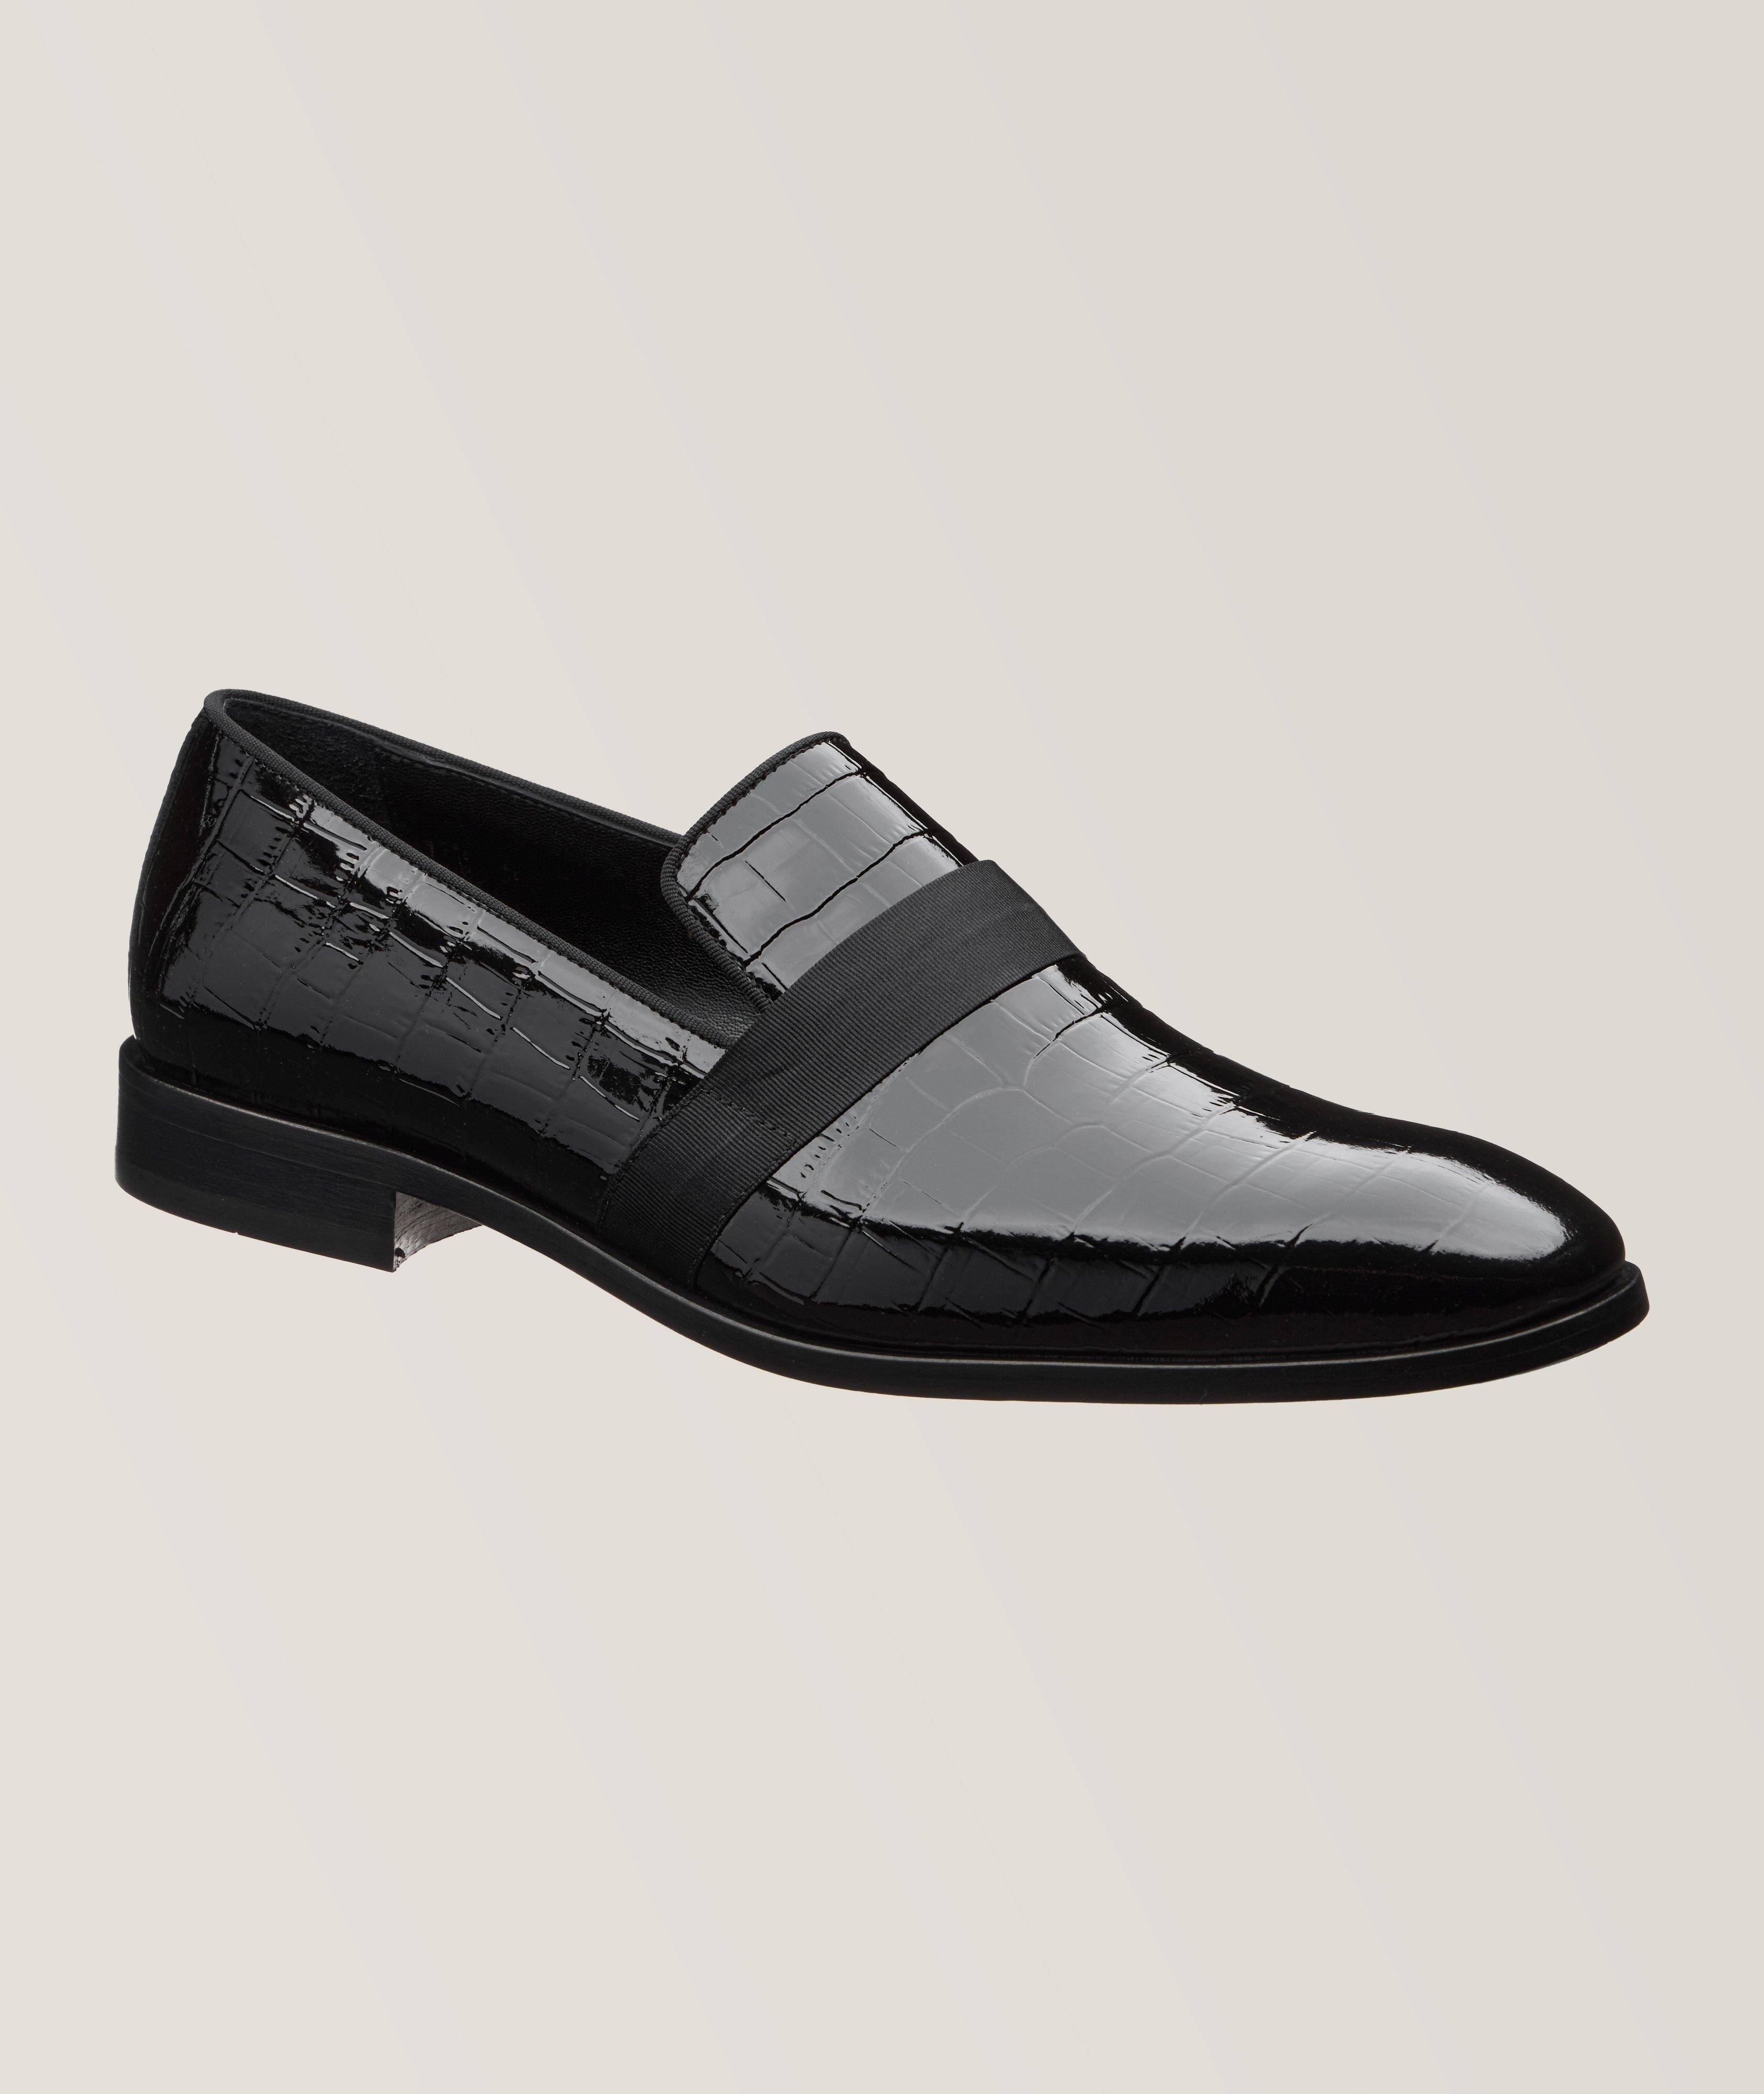 Crocodile Patent Banded Loafers image 0